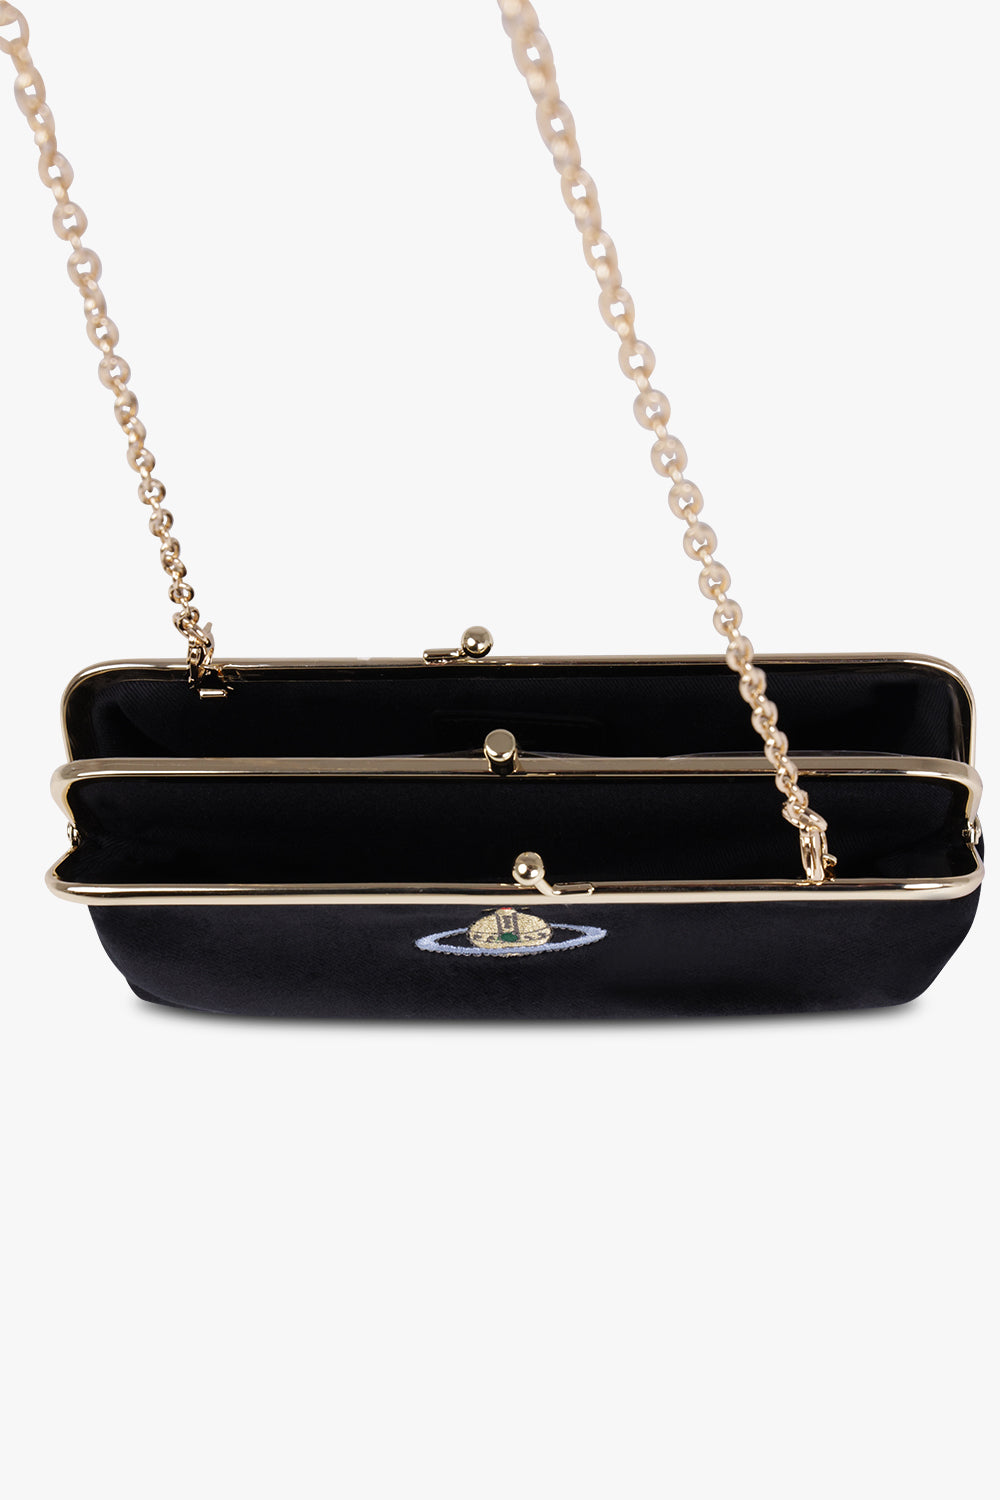 Designer Velour Ladies Gold Evening Bags With Double Letter Chain Strap And  Solid Hasp Clutch Purse From Fashionshoe88, $64.87 | DHgate.Com